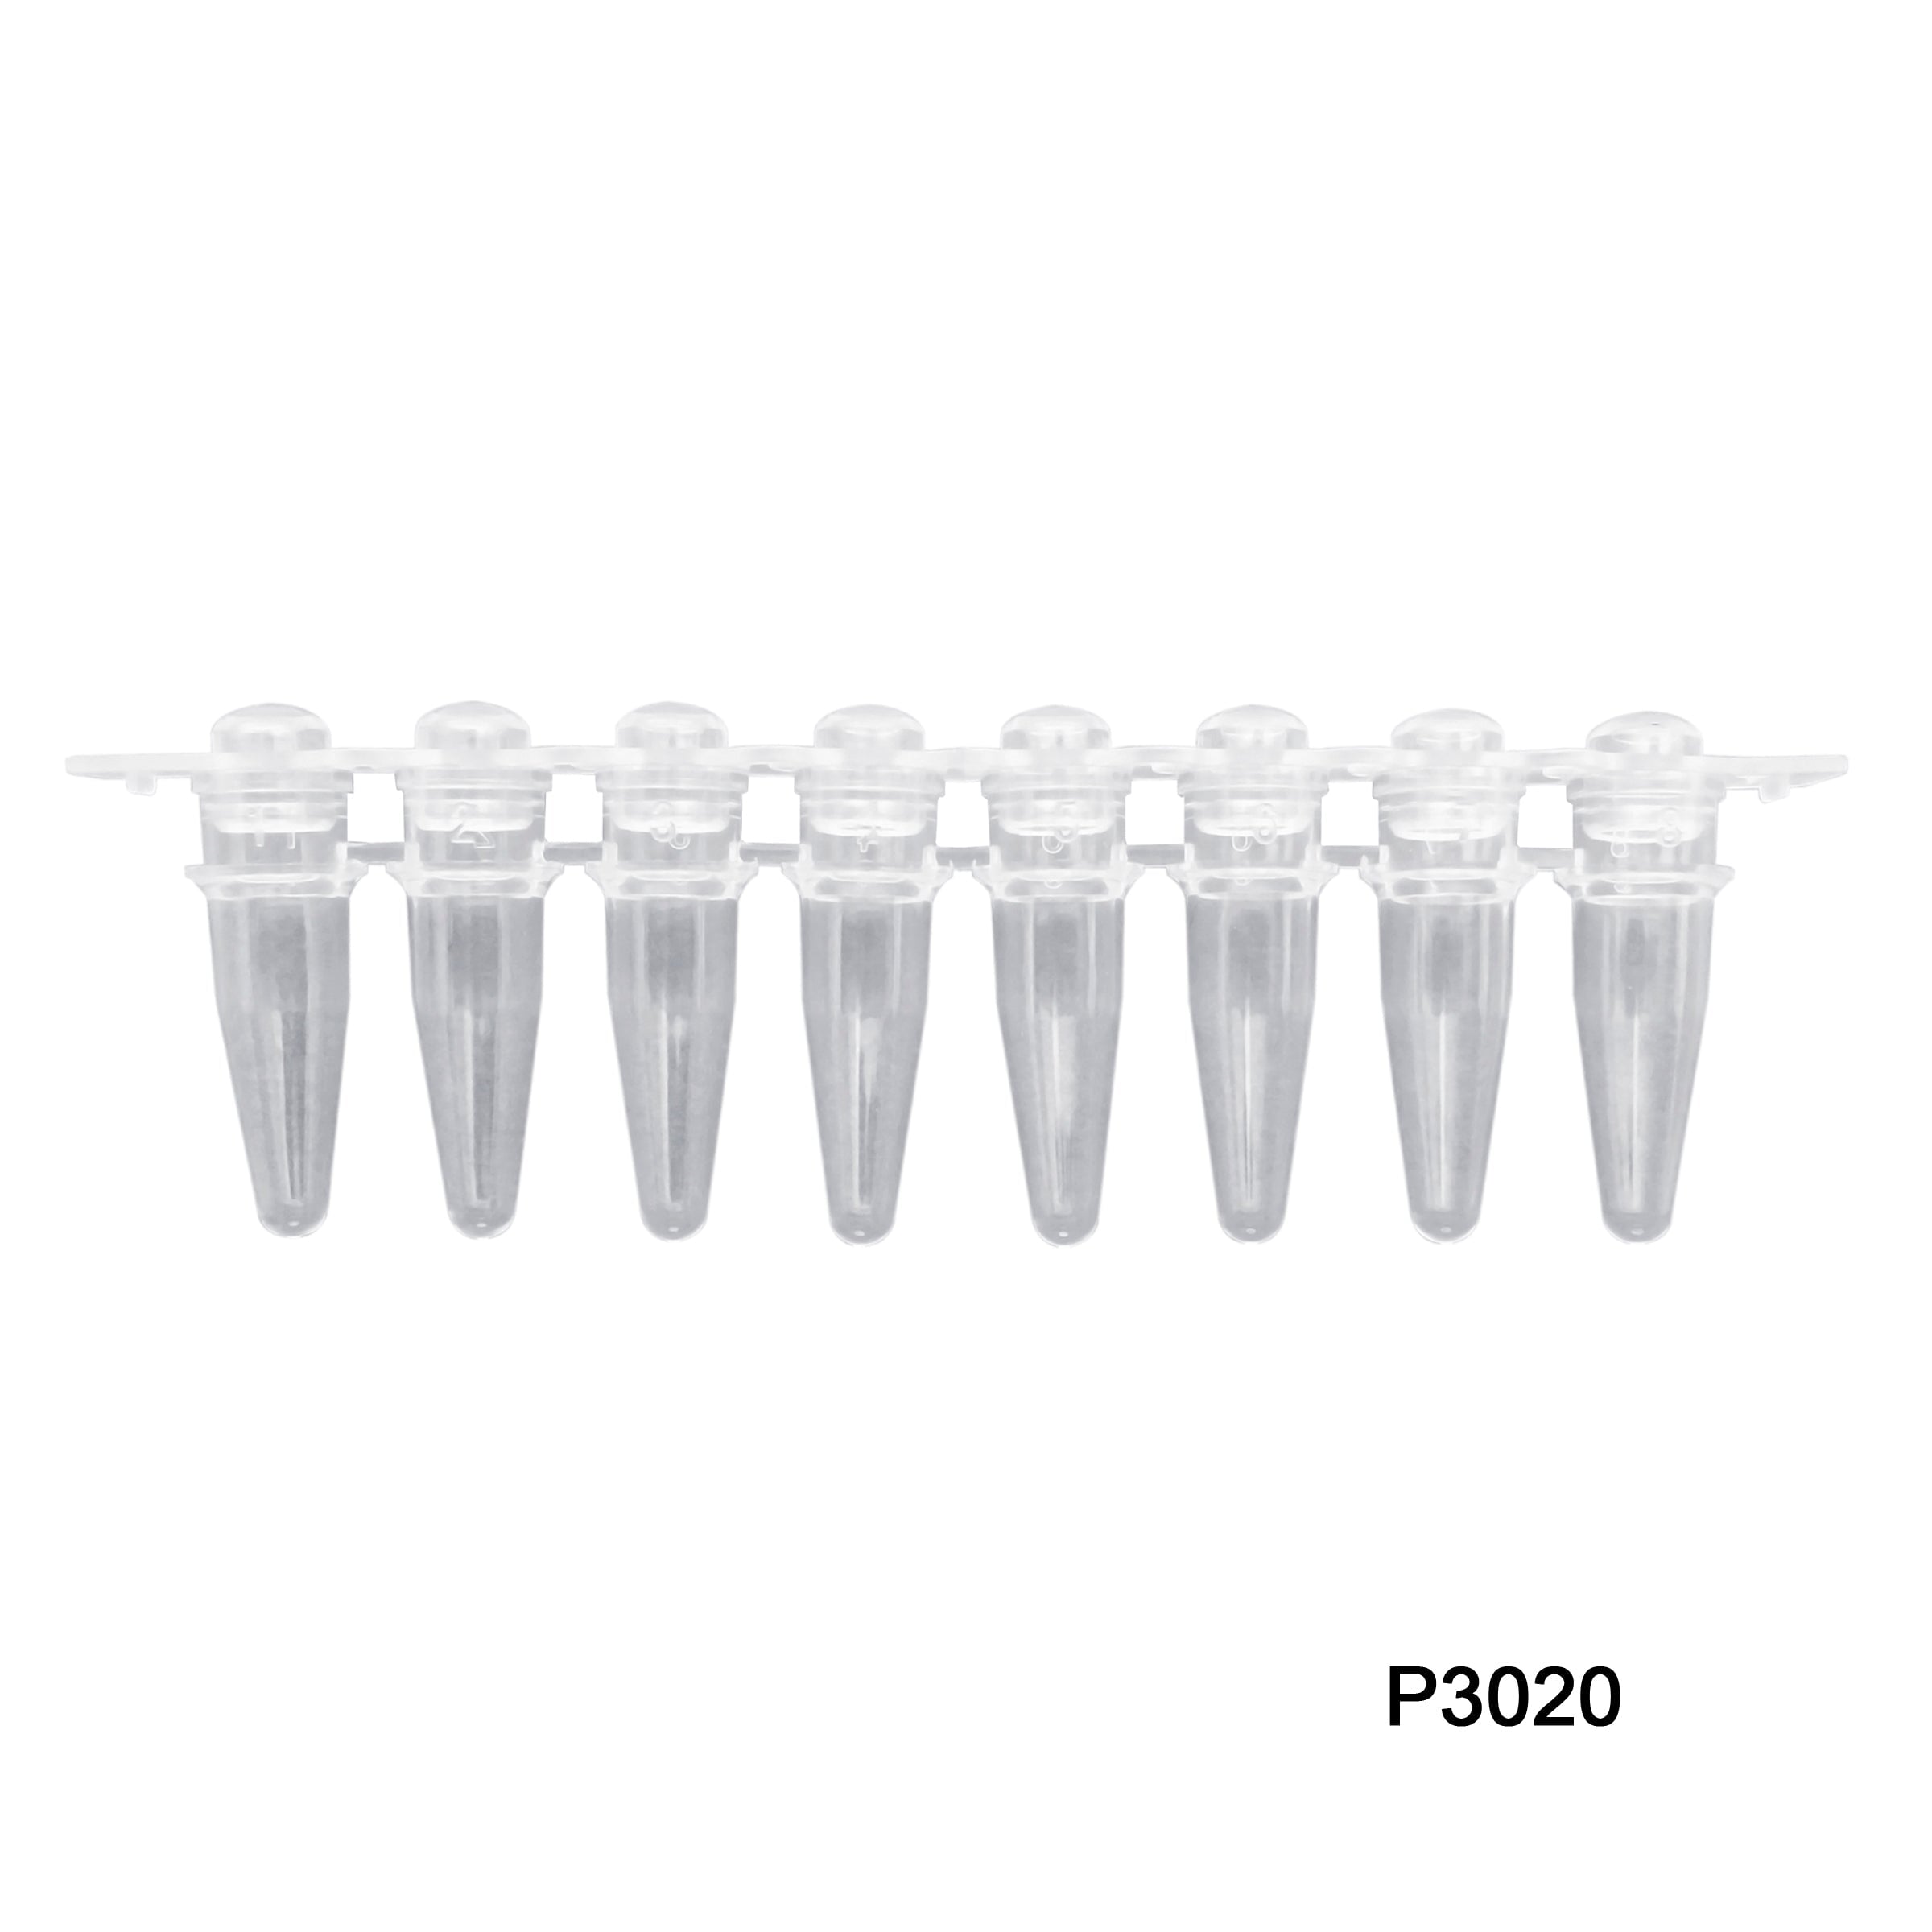 MTC Bio P3020 PCR Tubes Strips of 8 tubes w/ dome caps packaged separately, 120/pk